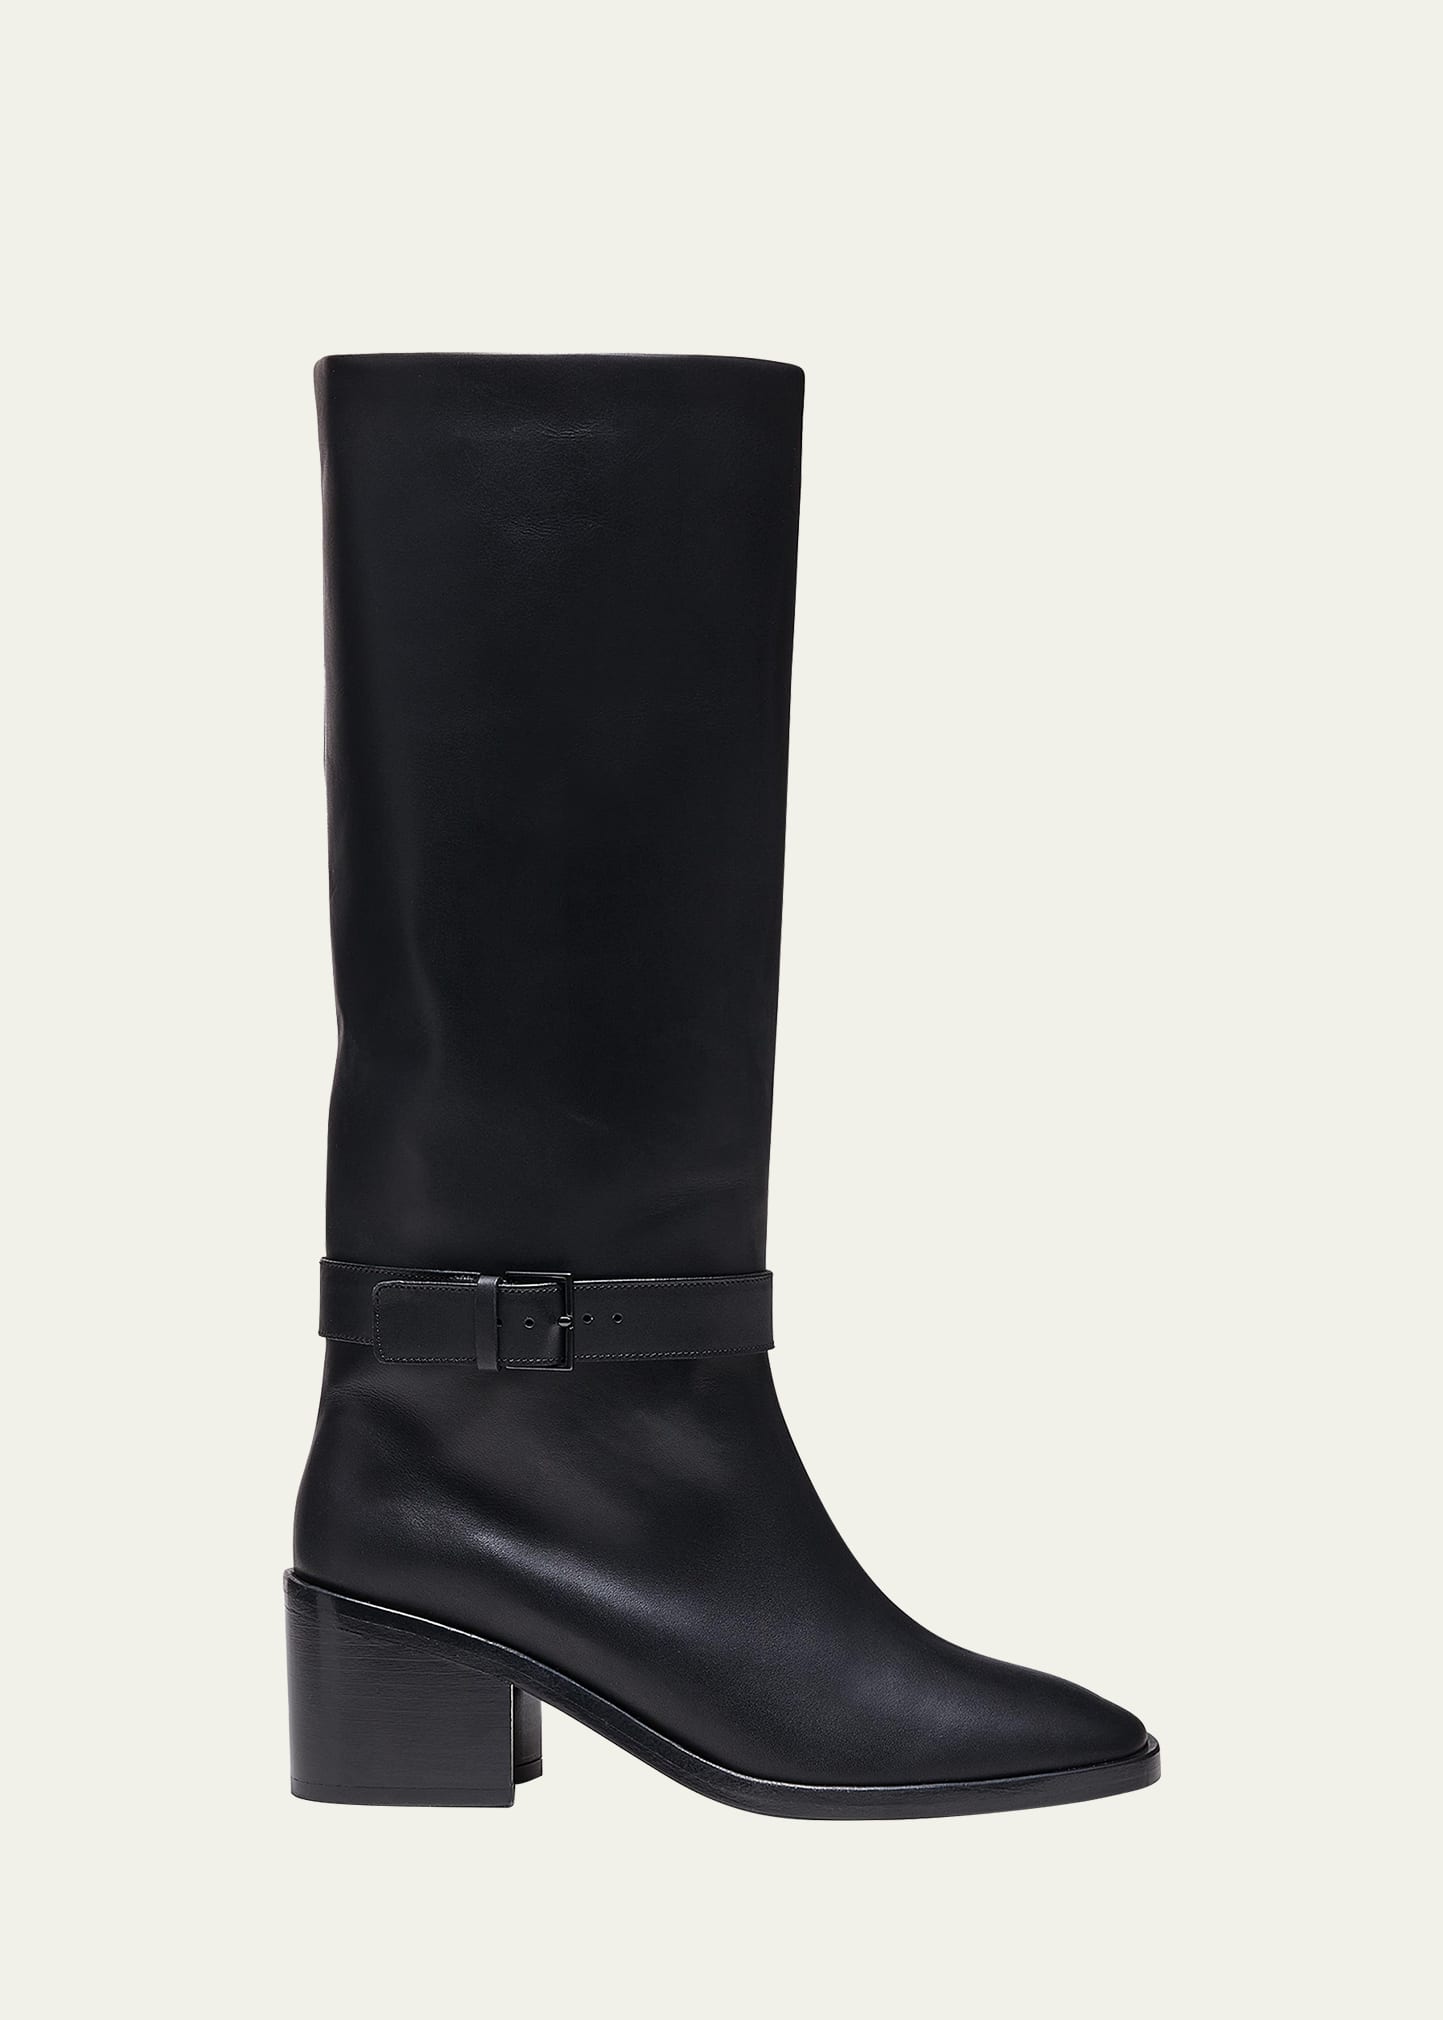 Clergerie Paris Tal Leather Buckle Tall Boots